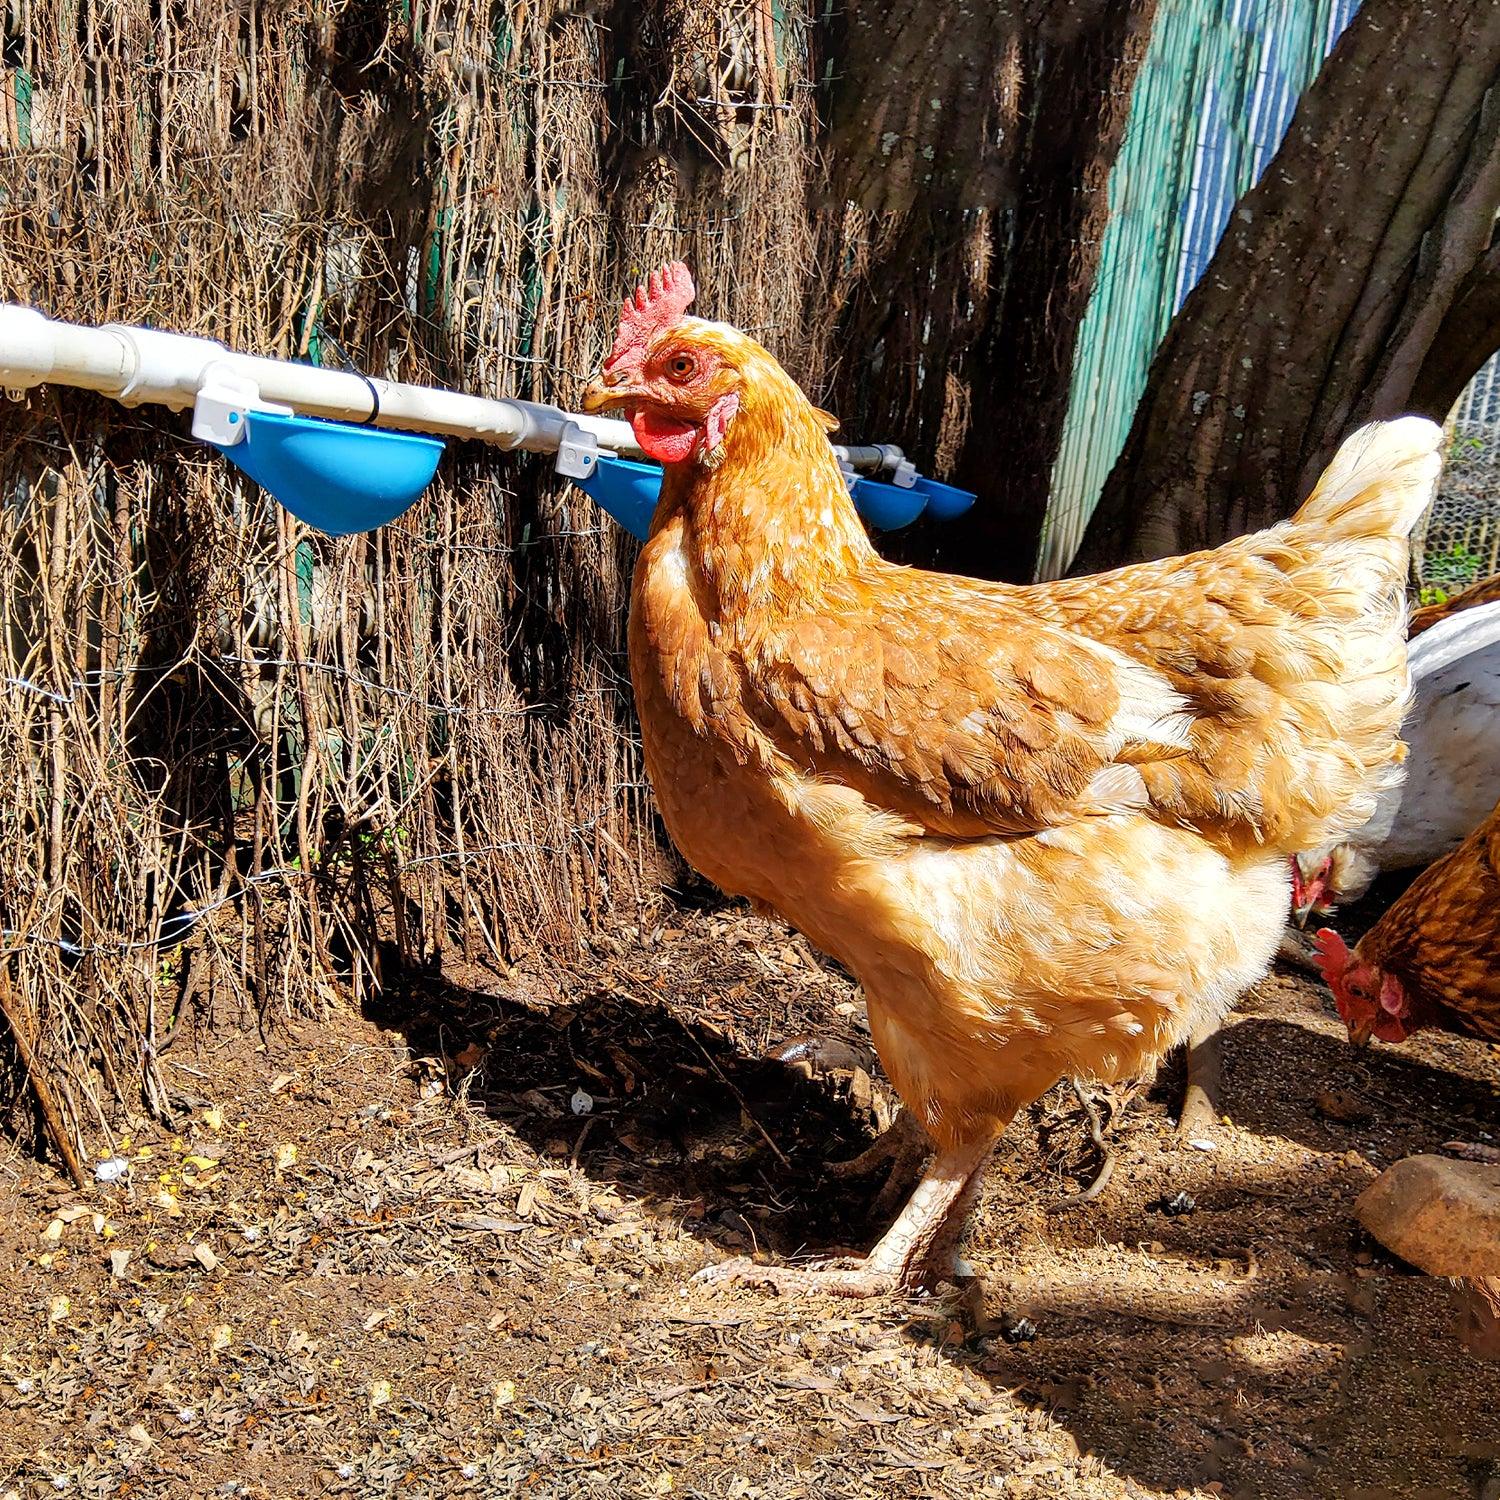 Poultry Automatic Drinker System Efficiently Solve Poultry